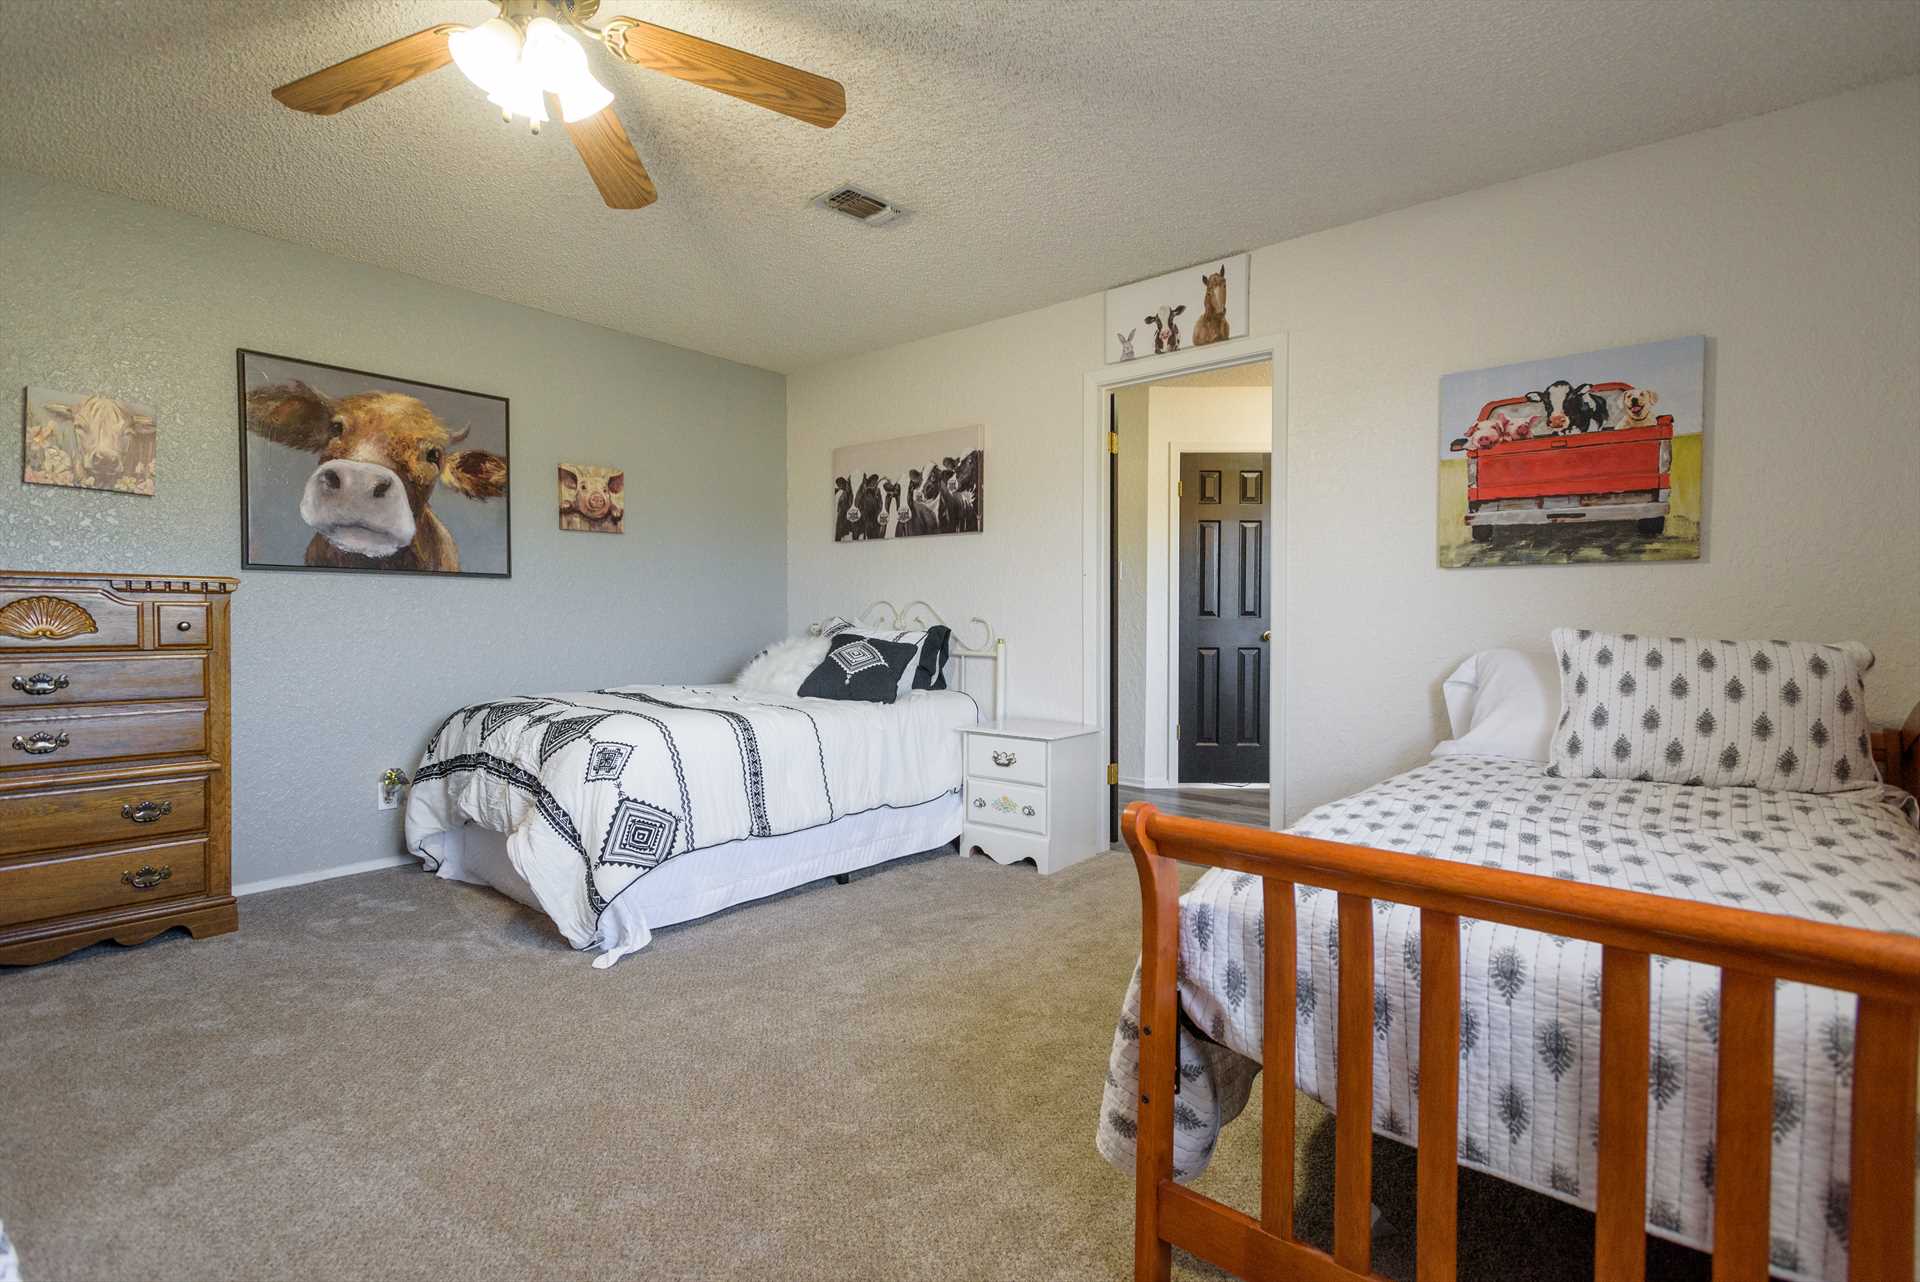                                                 There's space for 11 people to sleep comfortably at Roulette Ranch, including an optional roll-away bed.